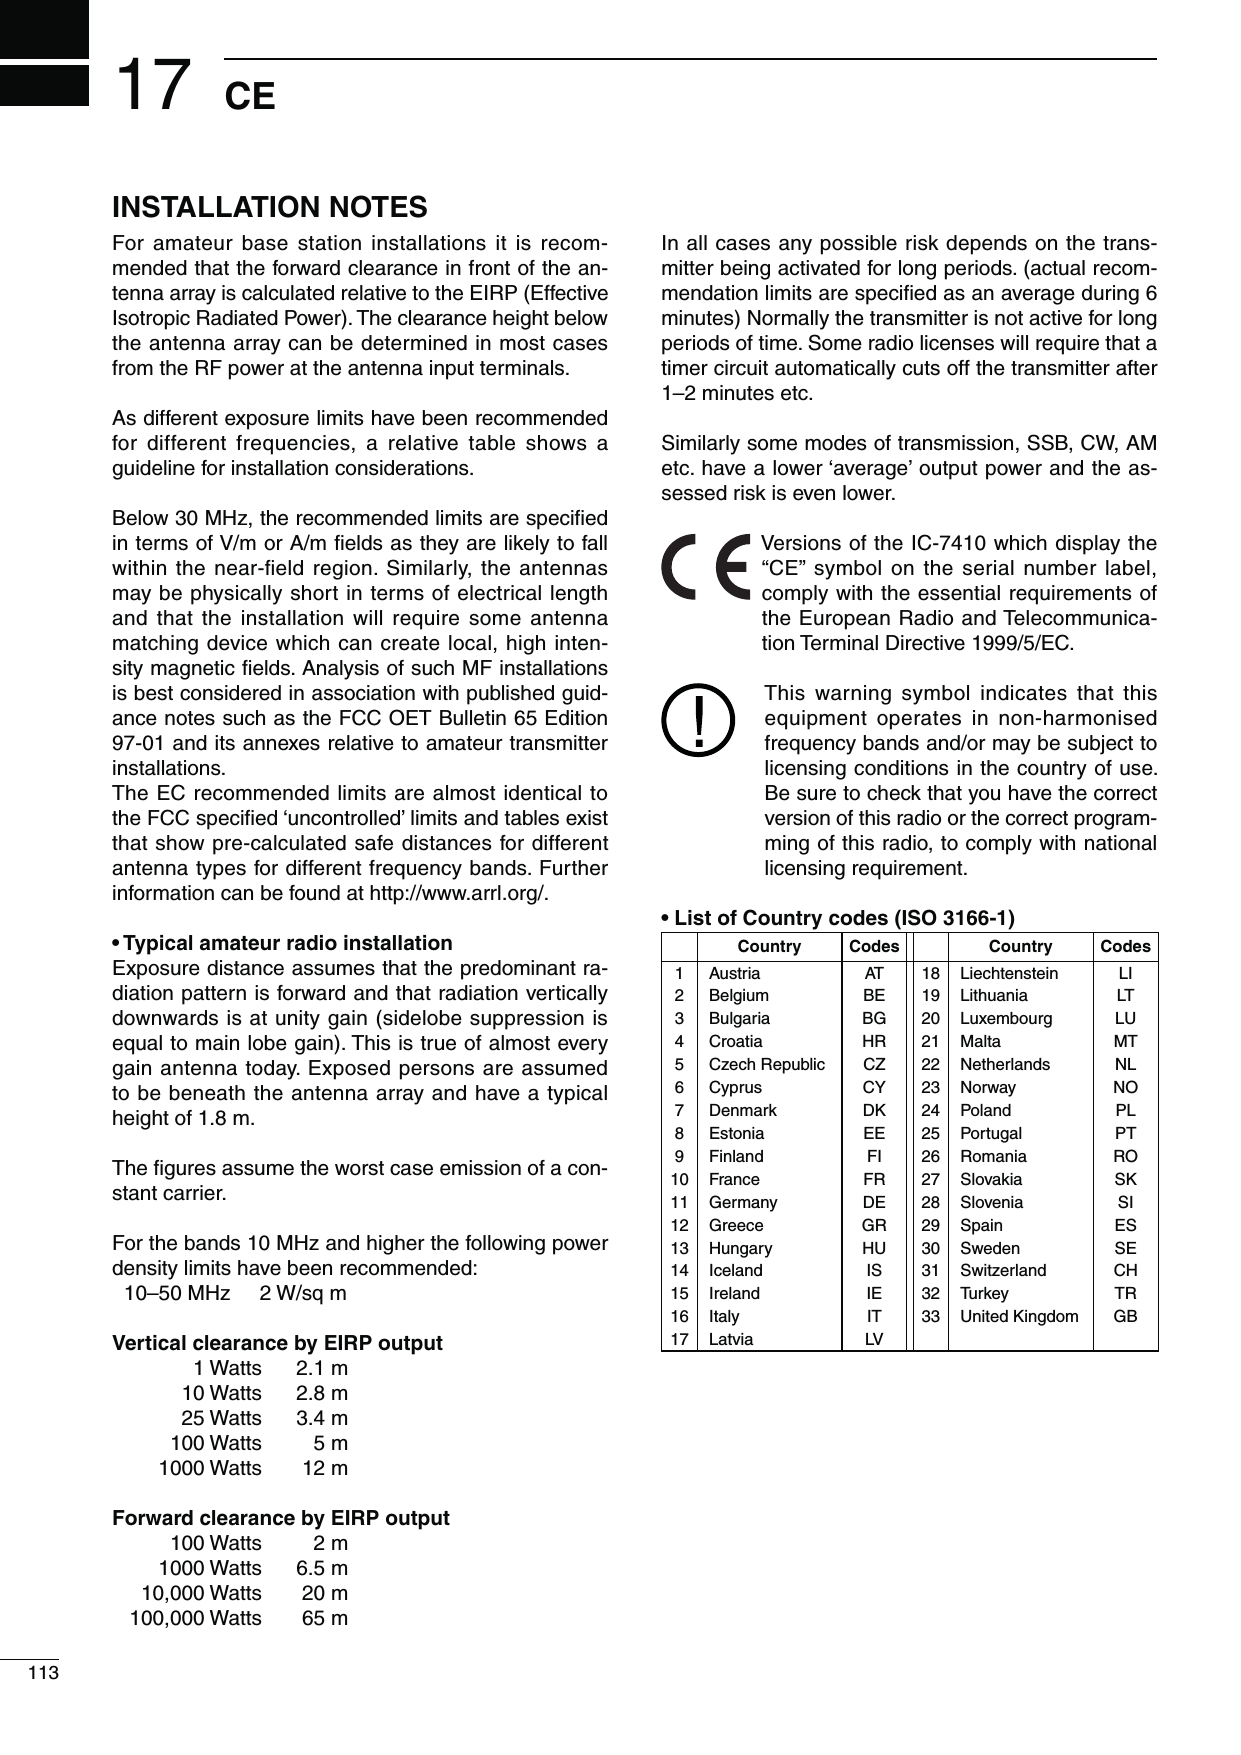 113CE17INSTALLATION NOTESFor amateur base station installations it is recom-mended that the forward clearance in front of the an-tenna array is calculated relative to the EIRP (Effective Isotropic Radiated Power). The clearance height below the antenna array can be determined in most cases from the RF power at the antenna input terminals.As different exposure limits have been recommended for different frequencies, a relative table shows a guideline for installation considerations.Below 30 MHz, the recommended limits are speciﬁed in terms of V/m or A/m ﬁelds as they are likely to fall within the near-ﬁeld region. Similarly, the antennas may be physically short in terms of electrical length and that the installation will require some antenna matching device which can create local, high inten-sity magnetic ﬁelds. Analysis of such MF installations is best considered in association with published guid-ance notes such as the FCC OET Bulletin 65 Edition 97-01 and its annexes relative to amateur transmitter installations.The EC recommended limits are almost identical to the FCC speciﬁed ‘uncontrolled’ limits and tables exist that show pre-calculated safe distances for different antenna types for different frequency bands. Further information can be found at http://www.arrl.org/.s4YPICALAMATEURRADIOINSTALLATIONExposure distance assumes that the predominant ra-diation pattern is forward and that radiation vertically downwards is at unity gain (sidelobe suppression is equal to main lobe gain). This is true of almost every gain antenna today. Exposed persons are assumed to be beneath the antenna array and have a typical height of 1.8 m.The ﬁgures assume the worst case emission of a con-stant carrier.For the bands 10 MHz and higher the following power density limits have been recommended:  10–50 MHz   2 W/sq m6ERTICALCLEARANCEBY%)20OUTPUT 1 Watts 2.1 m  10 Watts   2.8 m 25 Watts 3.4 m 100 Watts 5 m 1000 Watts 12 m&amp;ORWARDCLEARANCEBY%)20OUTPUT 100 Watts 2 m 1000 Watts 6.5 m 10,000 Watts  20 m 100,000 Watts  65 mIn all cases any possible risk depends on the trans-mitter being activated for long periods. (actual recom-mendation limits are speciﬁed as an average during 6 minutes) Normally the transmitter is not active for long periods of time. Some radio licenses will require that a timer circuit automatically cuts off the transmitter after 1–2 minutes etc.Similarly some modes of transmission, SSB, CW, AM etc. have a lower ‘average’ output power and the as-sessed risk is even lower.Versions of the IC-7410 which display the “CE” symbol on the serial number label, comply with the essential requirements of the European Radio and Telecommunica-tion Terminal Directive 1999/5/EC.This warning symbol indicates that this equipment operates in non-harmonised frequency bands and/or may be subject to licensing conditions in the country of use. Be sure to check that you have the correct version of this radio or the correct program-ming of this radio, to comply with national licensing requirement.s,ISTOF#OUNTRYCODES)3/#OUNTRY #ODES #OUNTRY #ODES1234567891011121314151617AustriaBelgiumBulgariaCroatiaCzech RepublicCyprusDenmarkEstoniaFinlandFranceGermanyGreeceHungaryIcelandIrelandItalyLatviaATBEBGHRCZCYDKEEFIFRDEGRHUISIEITLV18192021222324252627282930313233LiechtensteinLithuaniaLuxembourgMaltaNetherlandsNorwayPolandPortugalRomaniaSlovakiaSloveniaSpainSwedenSwitzerlandTurkeyUnited KingdomLILTLUMTNLNOPLPTROSKSIESSECHTRGB